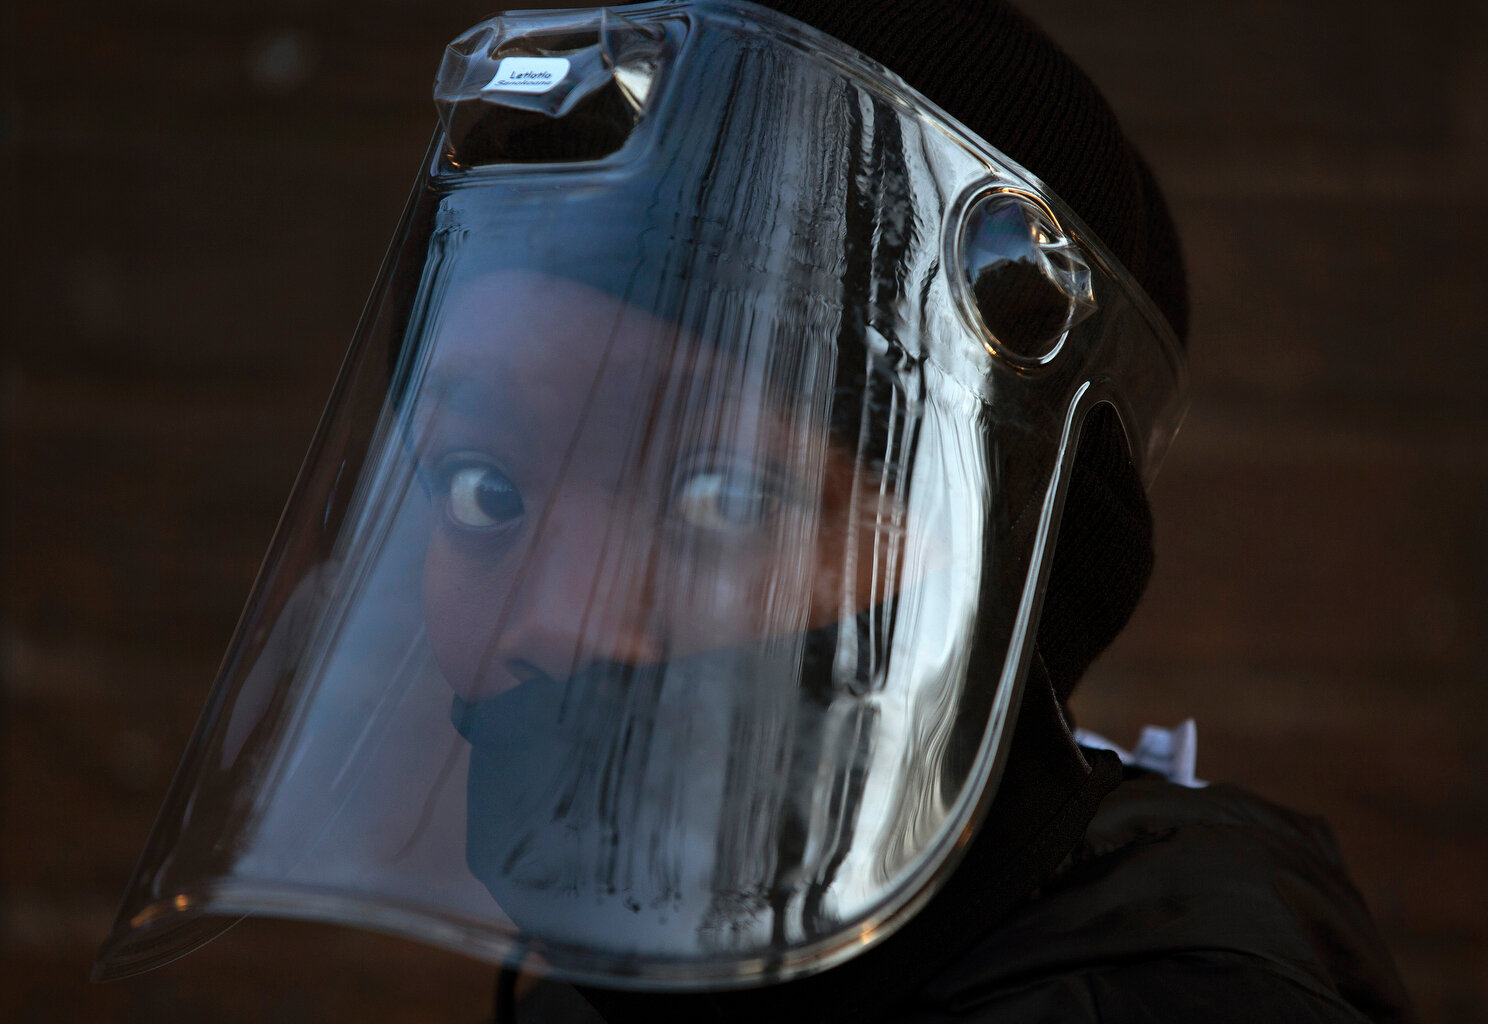  A student, wearing a face mask and shield to protect against the spread of COVID-19, returns to the Melpark Primary School in Johannesburg, Monday Aug. 24, 2020. (AP Photo/Denis Farrell) 